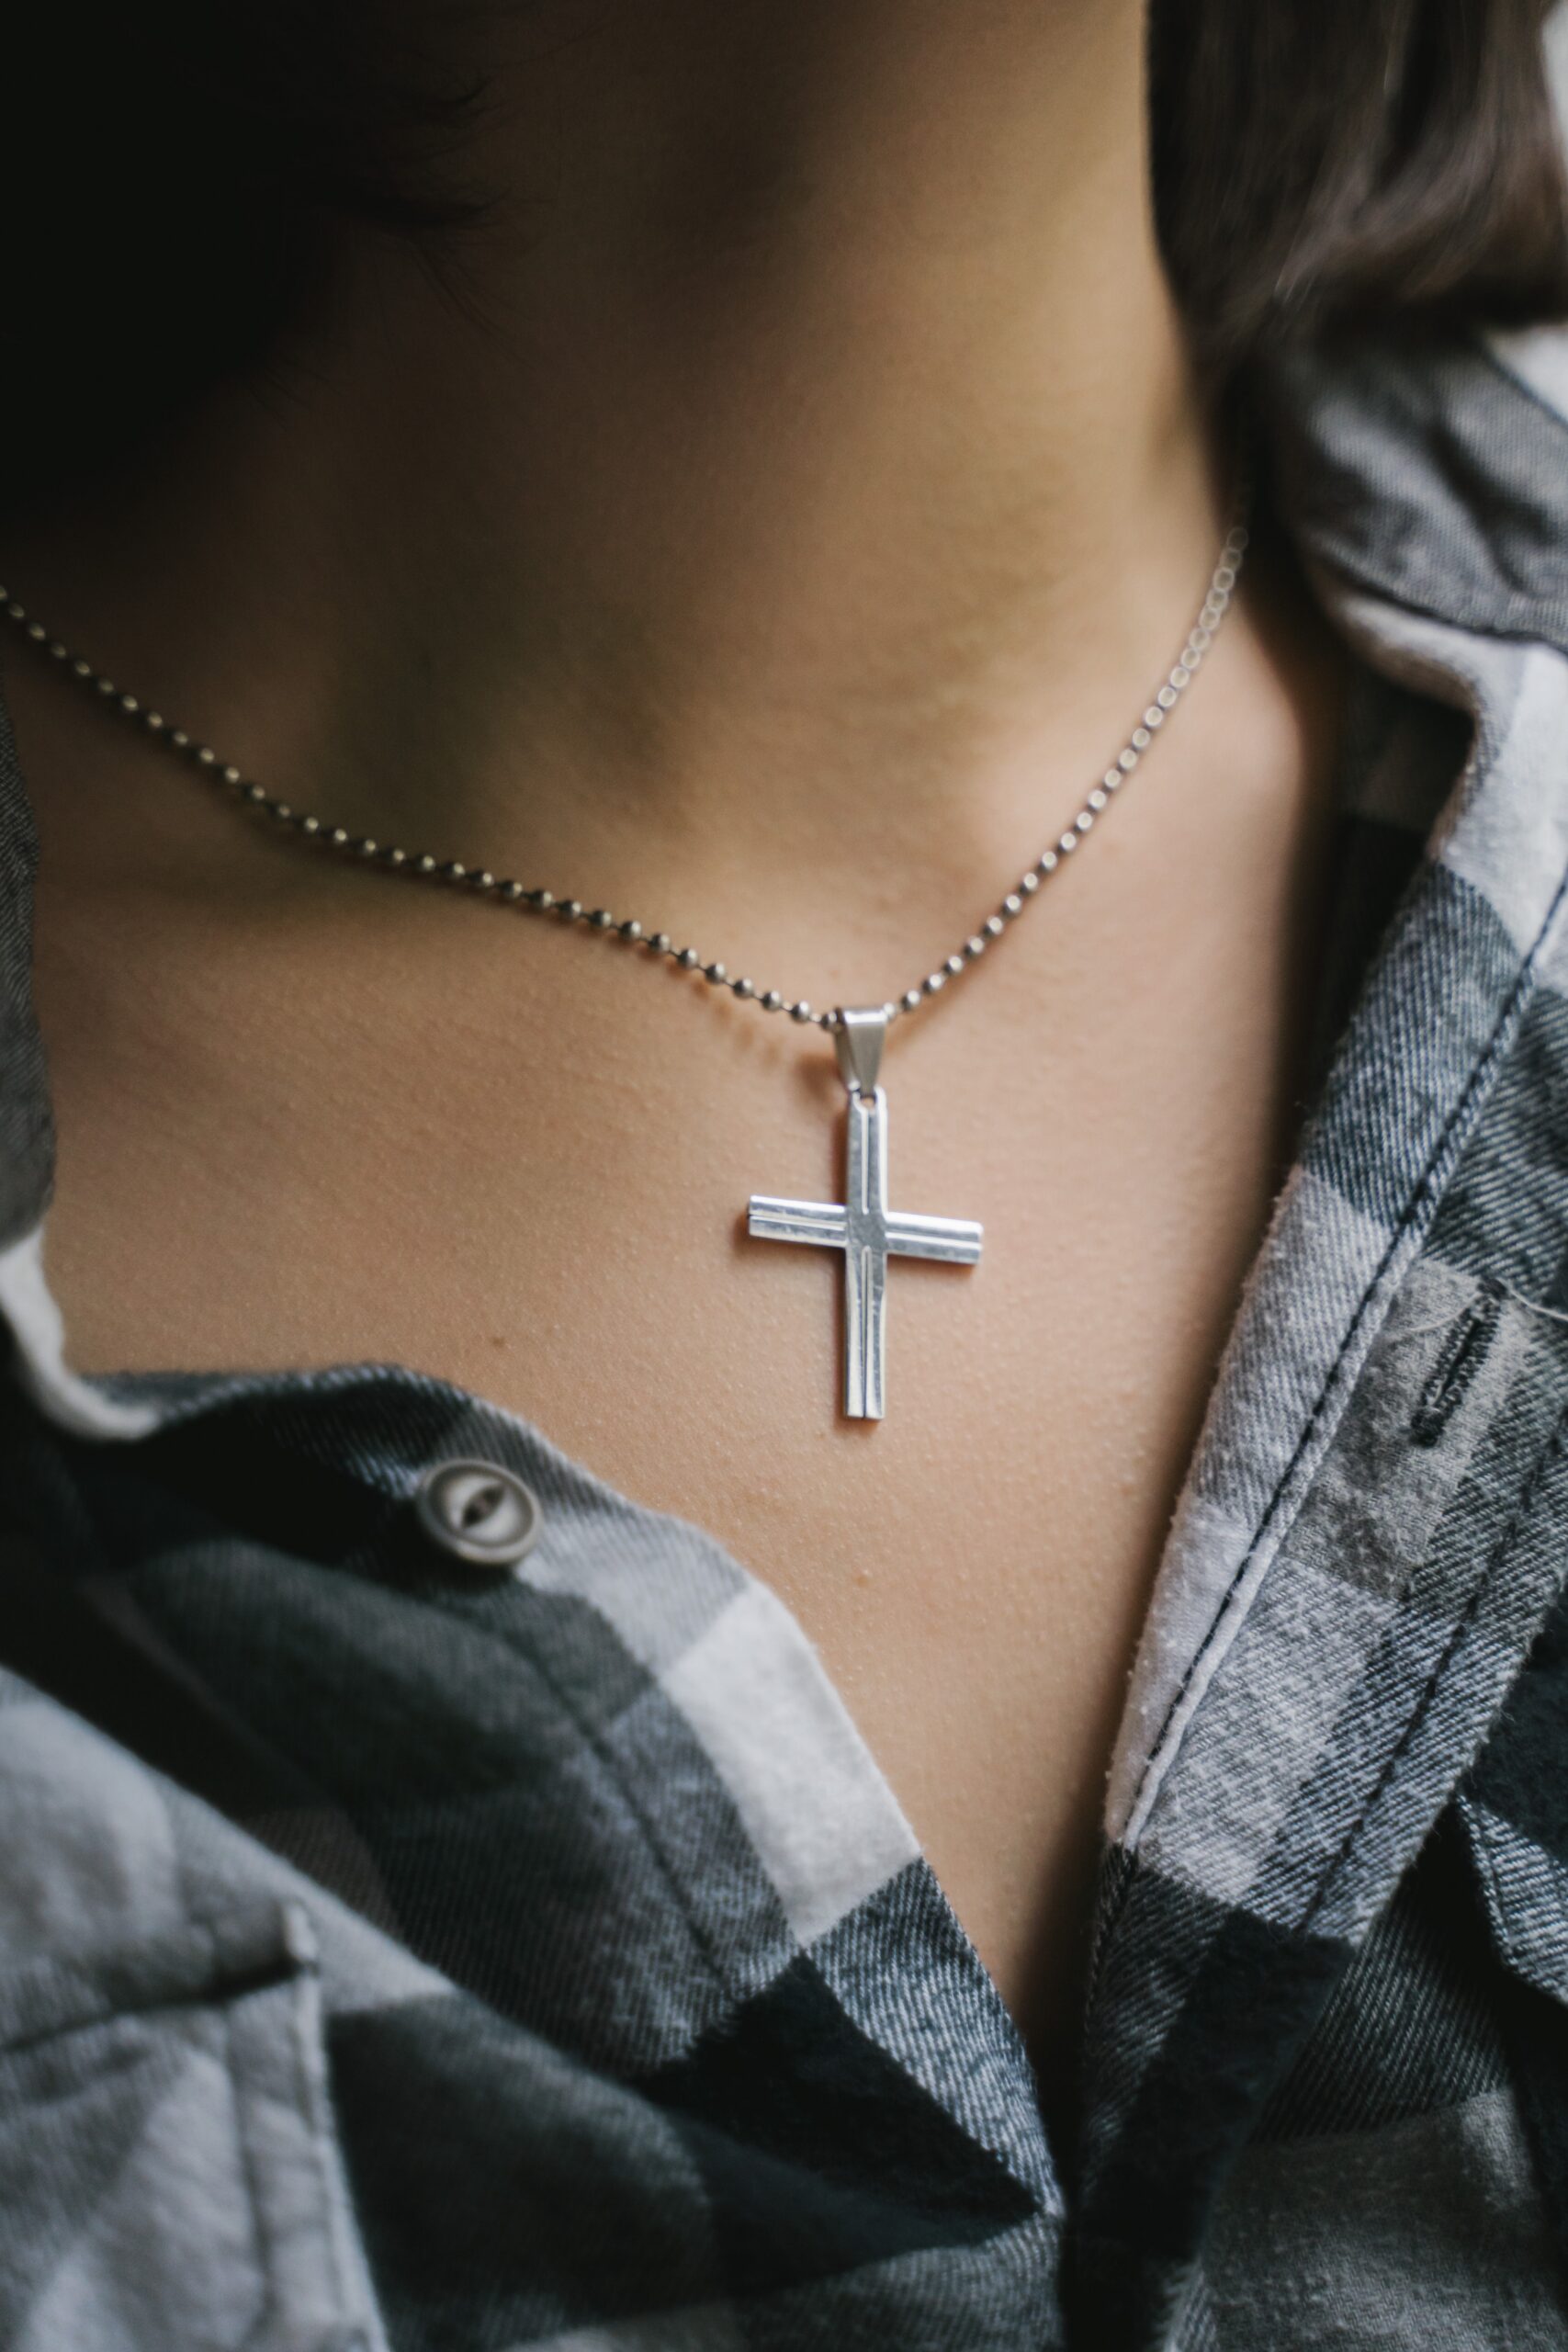 Crafting Excellence The Artistry Behind Ice Cartel’s Moissanite Cross Necklaces